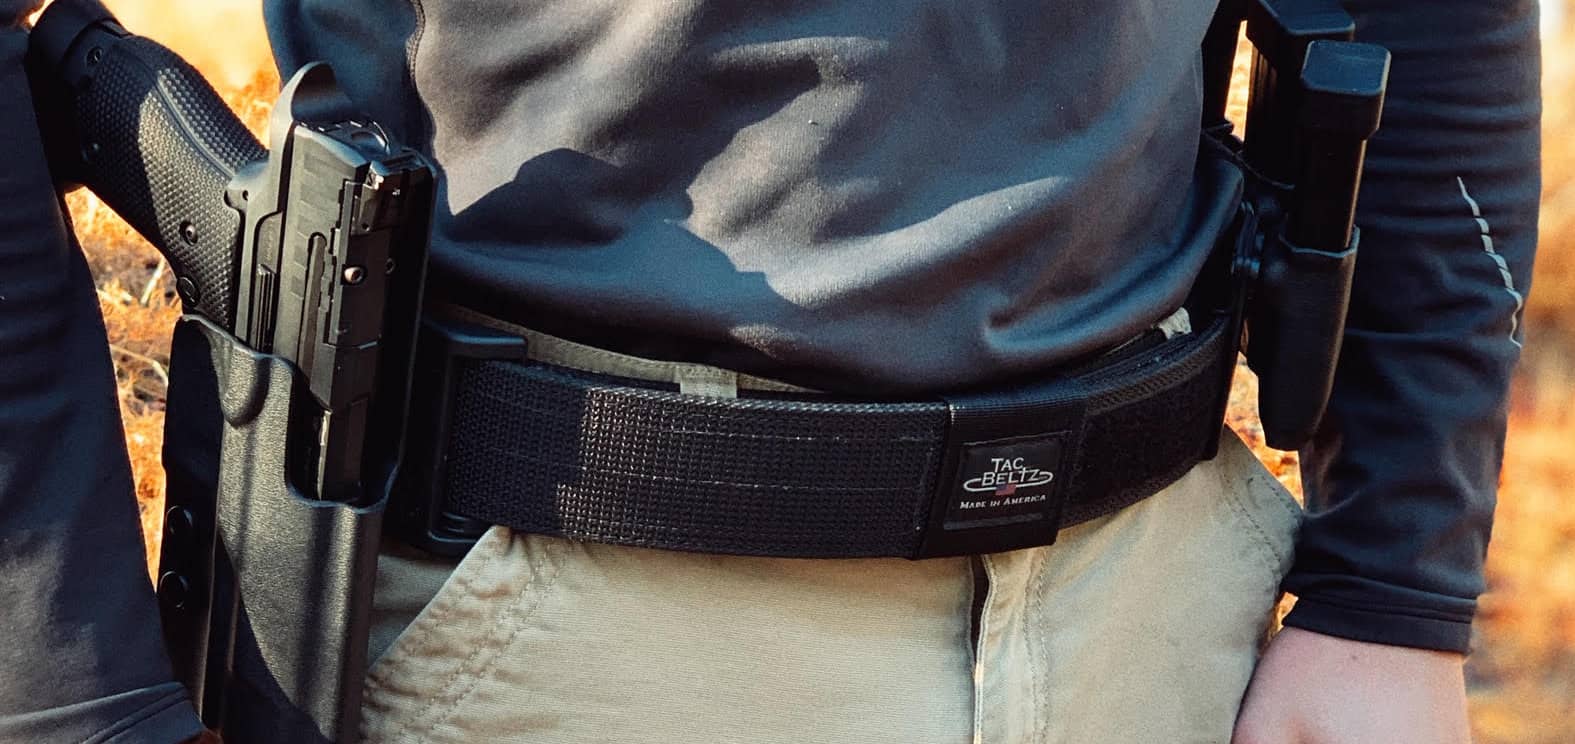 3. Types of Holsters Suitable for Competitive Shooting